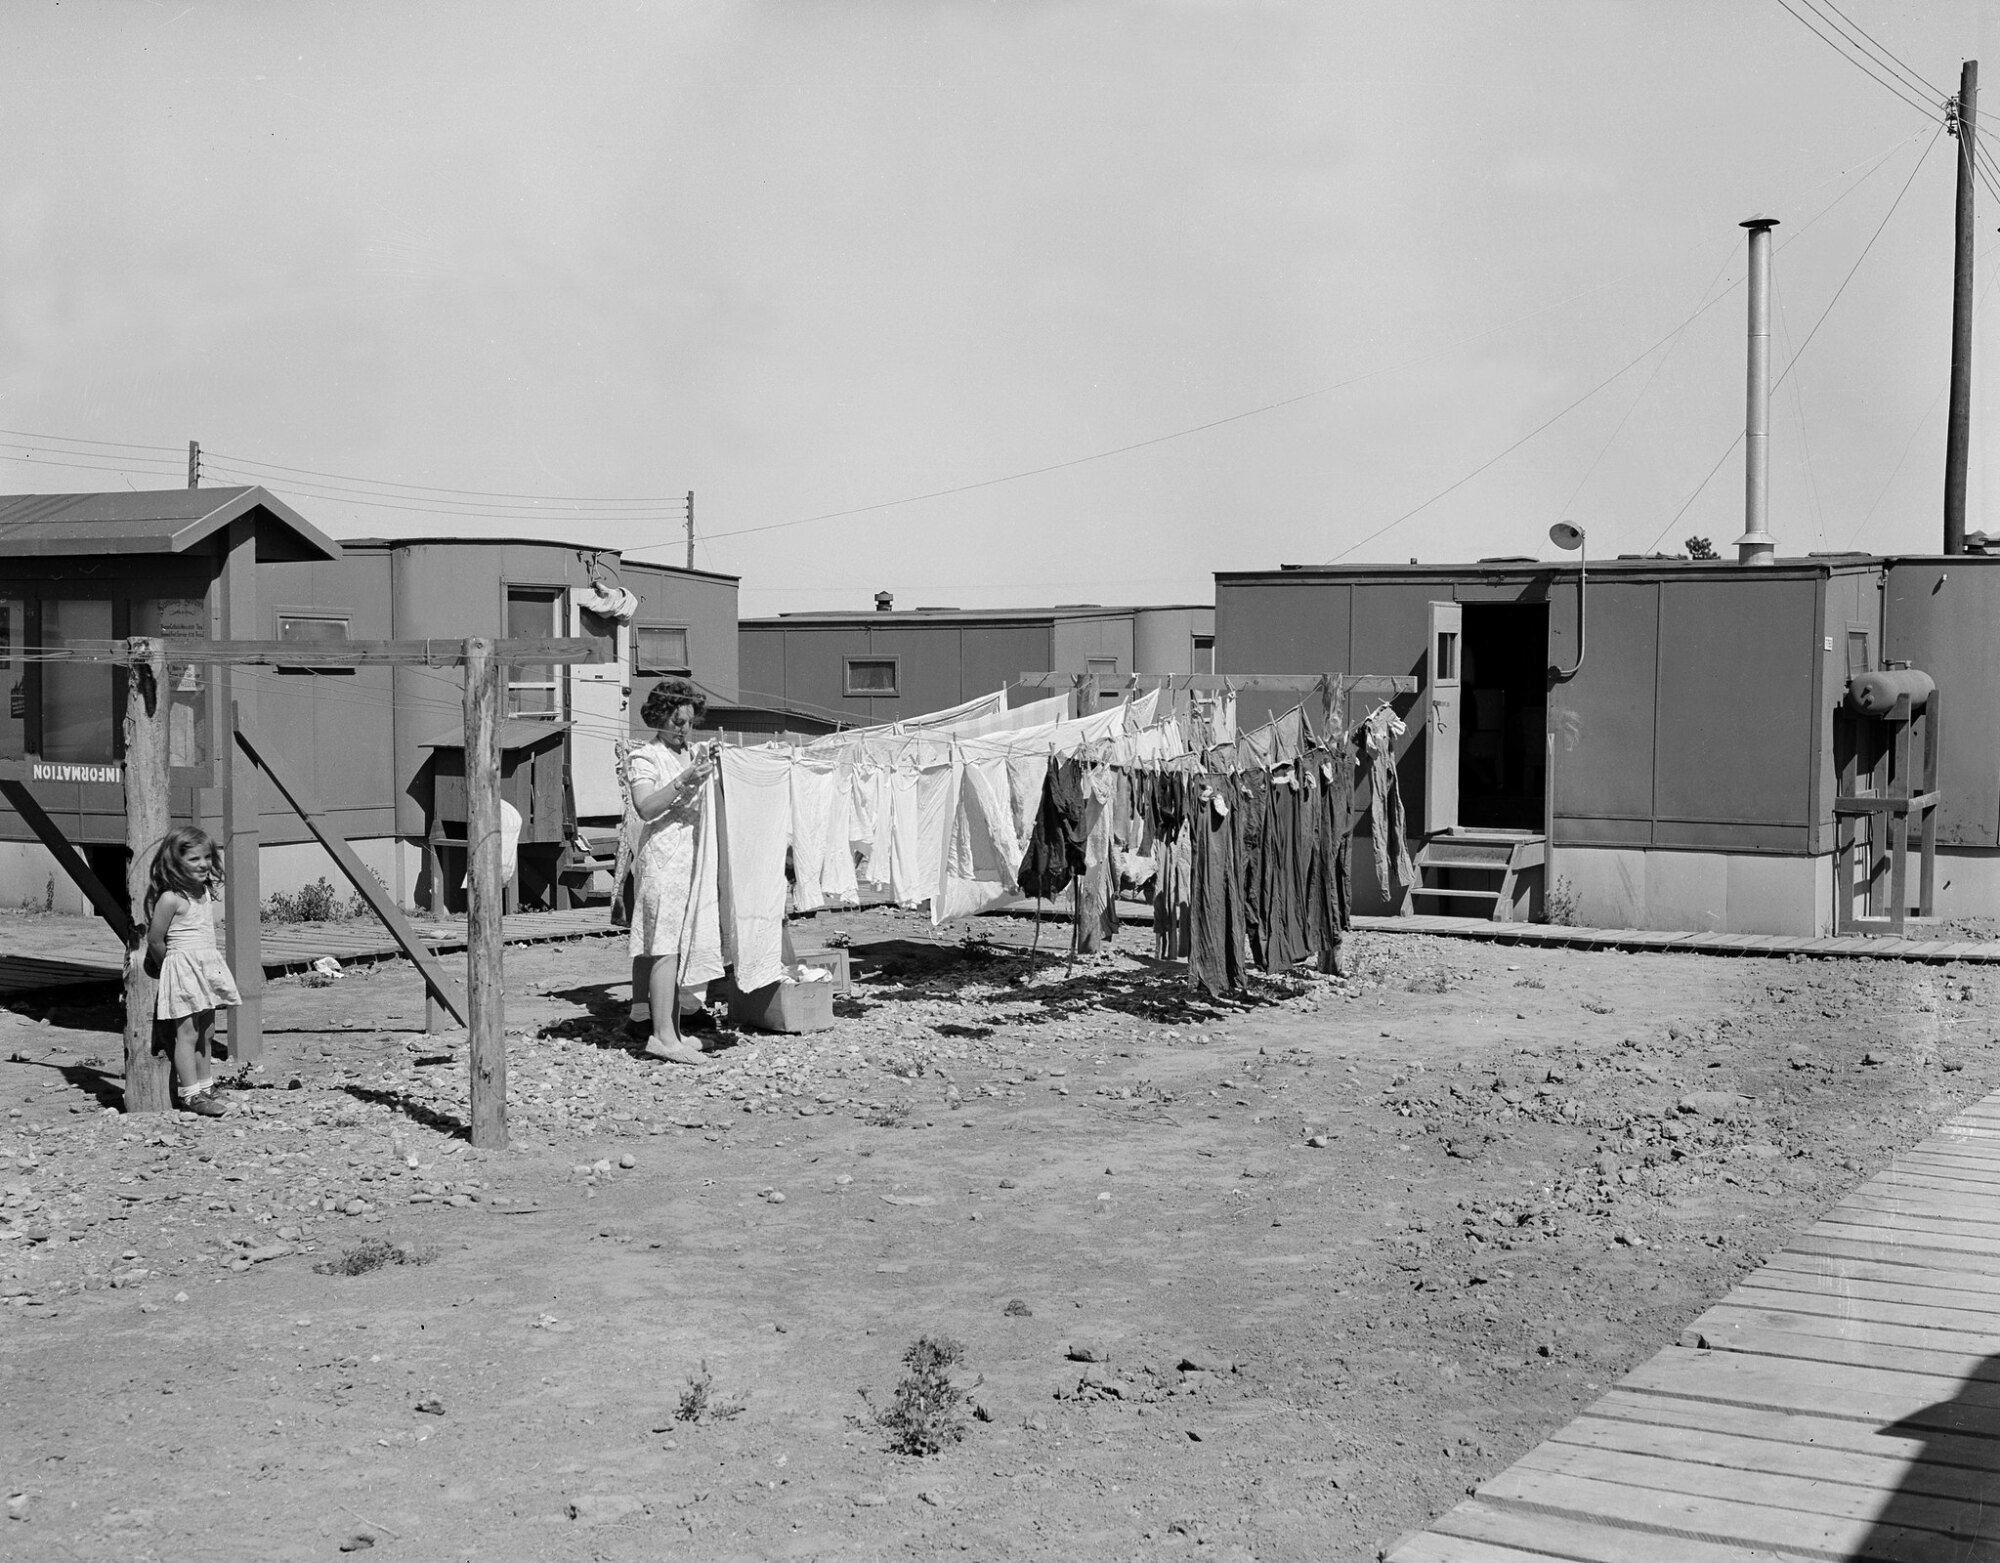 Daily life and spartan housing at the secretive Los Alamos site.